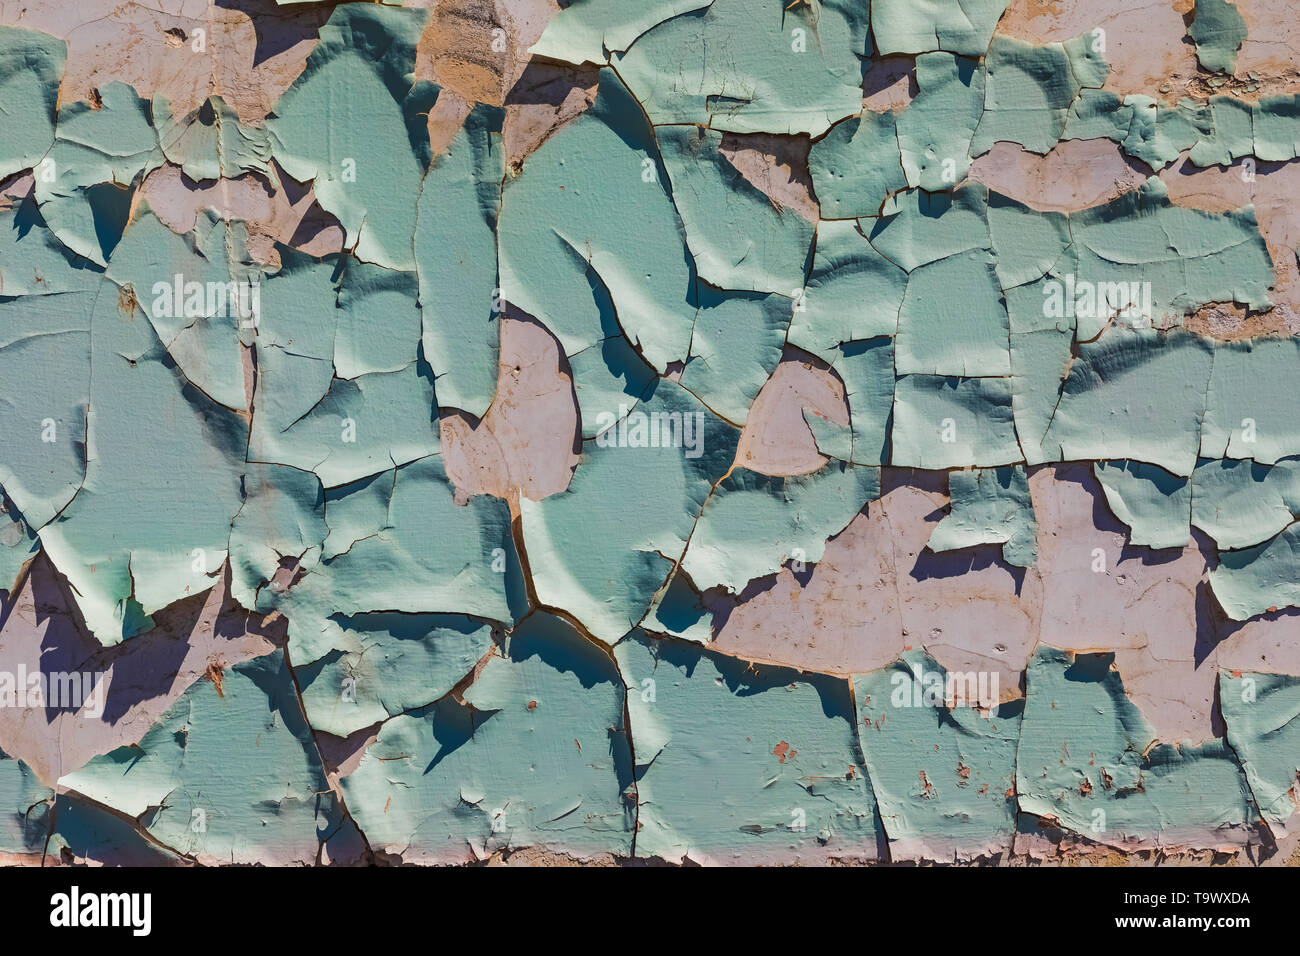 Paint peeling off the side of a building in Sprague, Washington State, USA Stock Photo